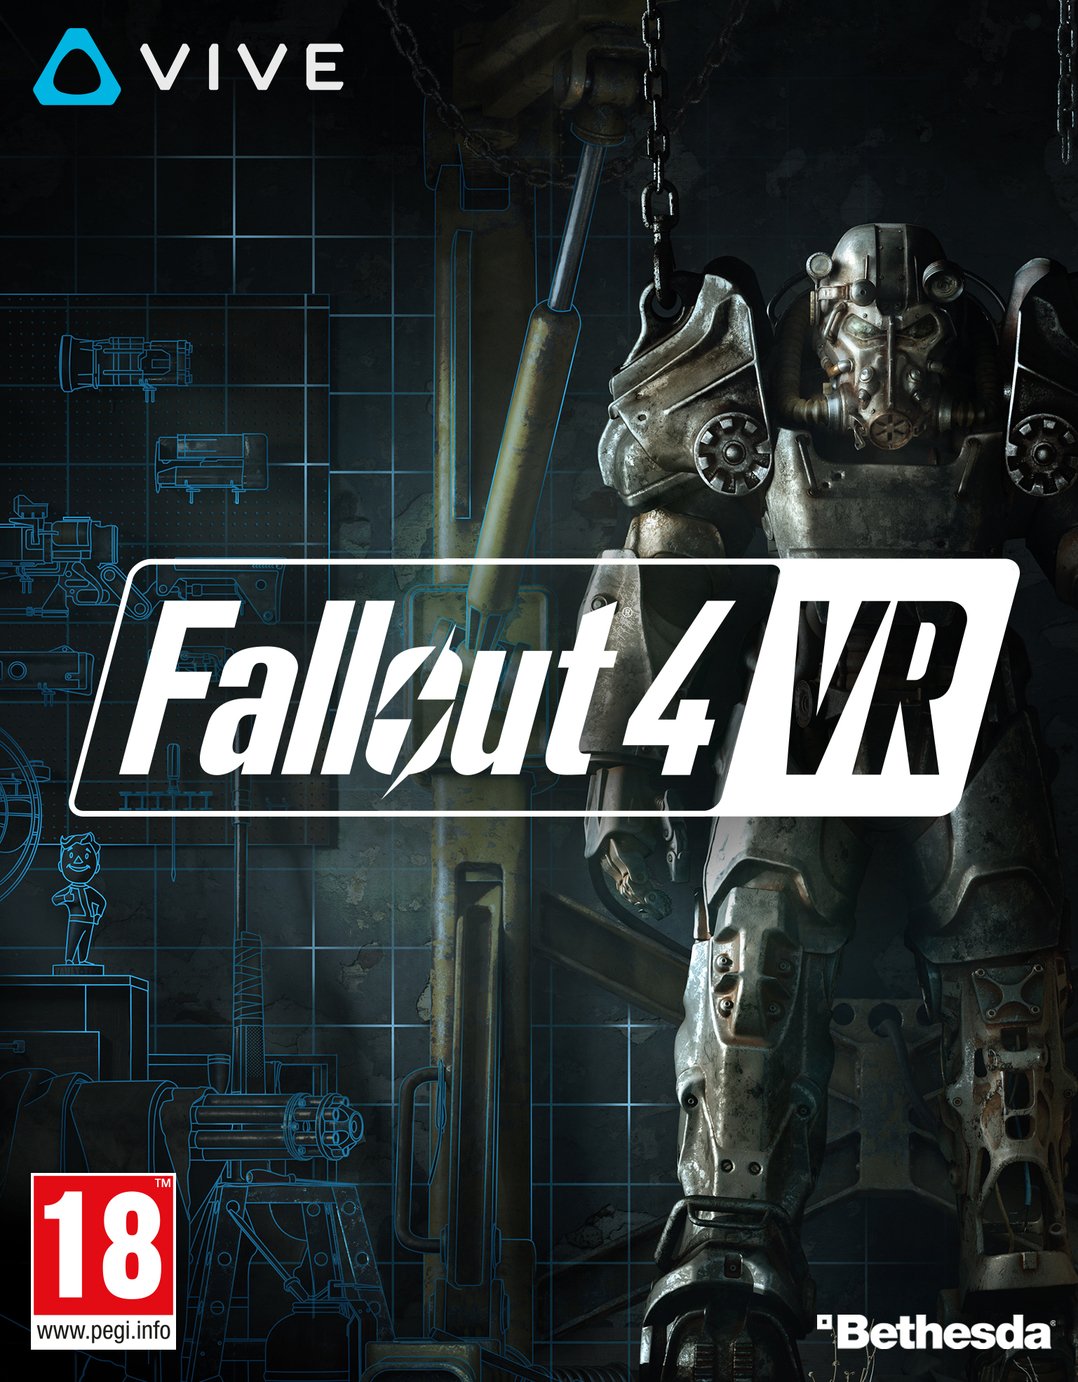 Fallout 4 VR PC Game